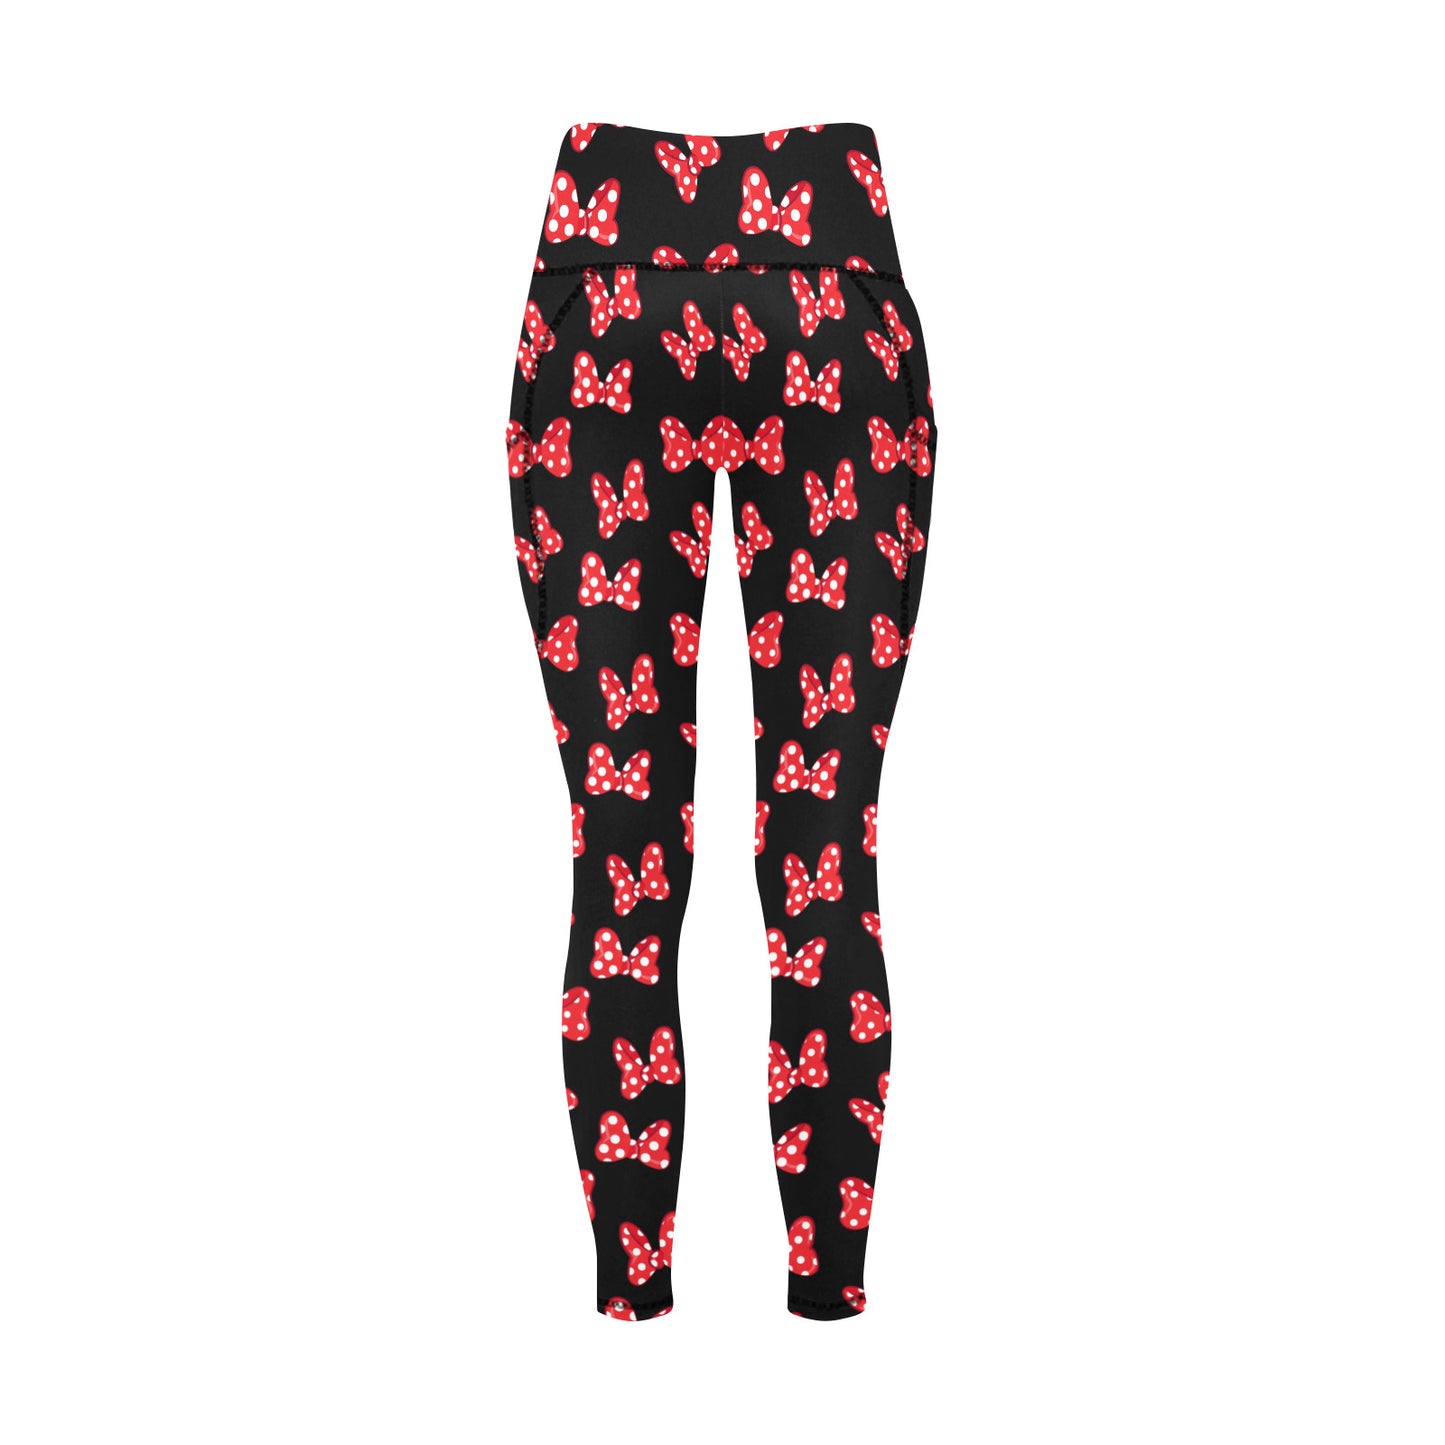 Polka Dot Bows Women's Athletic Leggings With Pockets